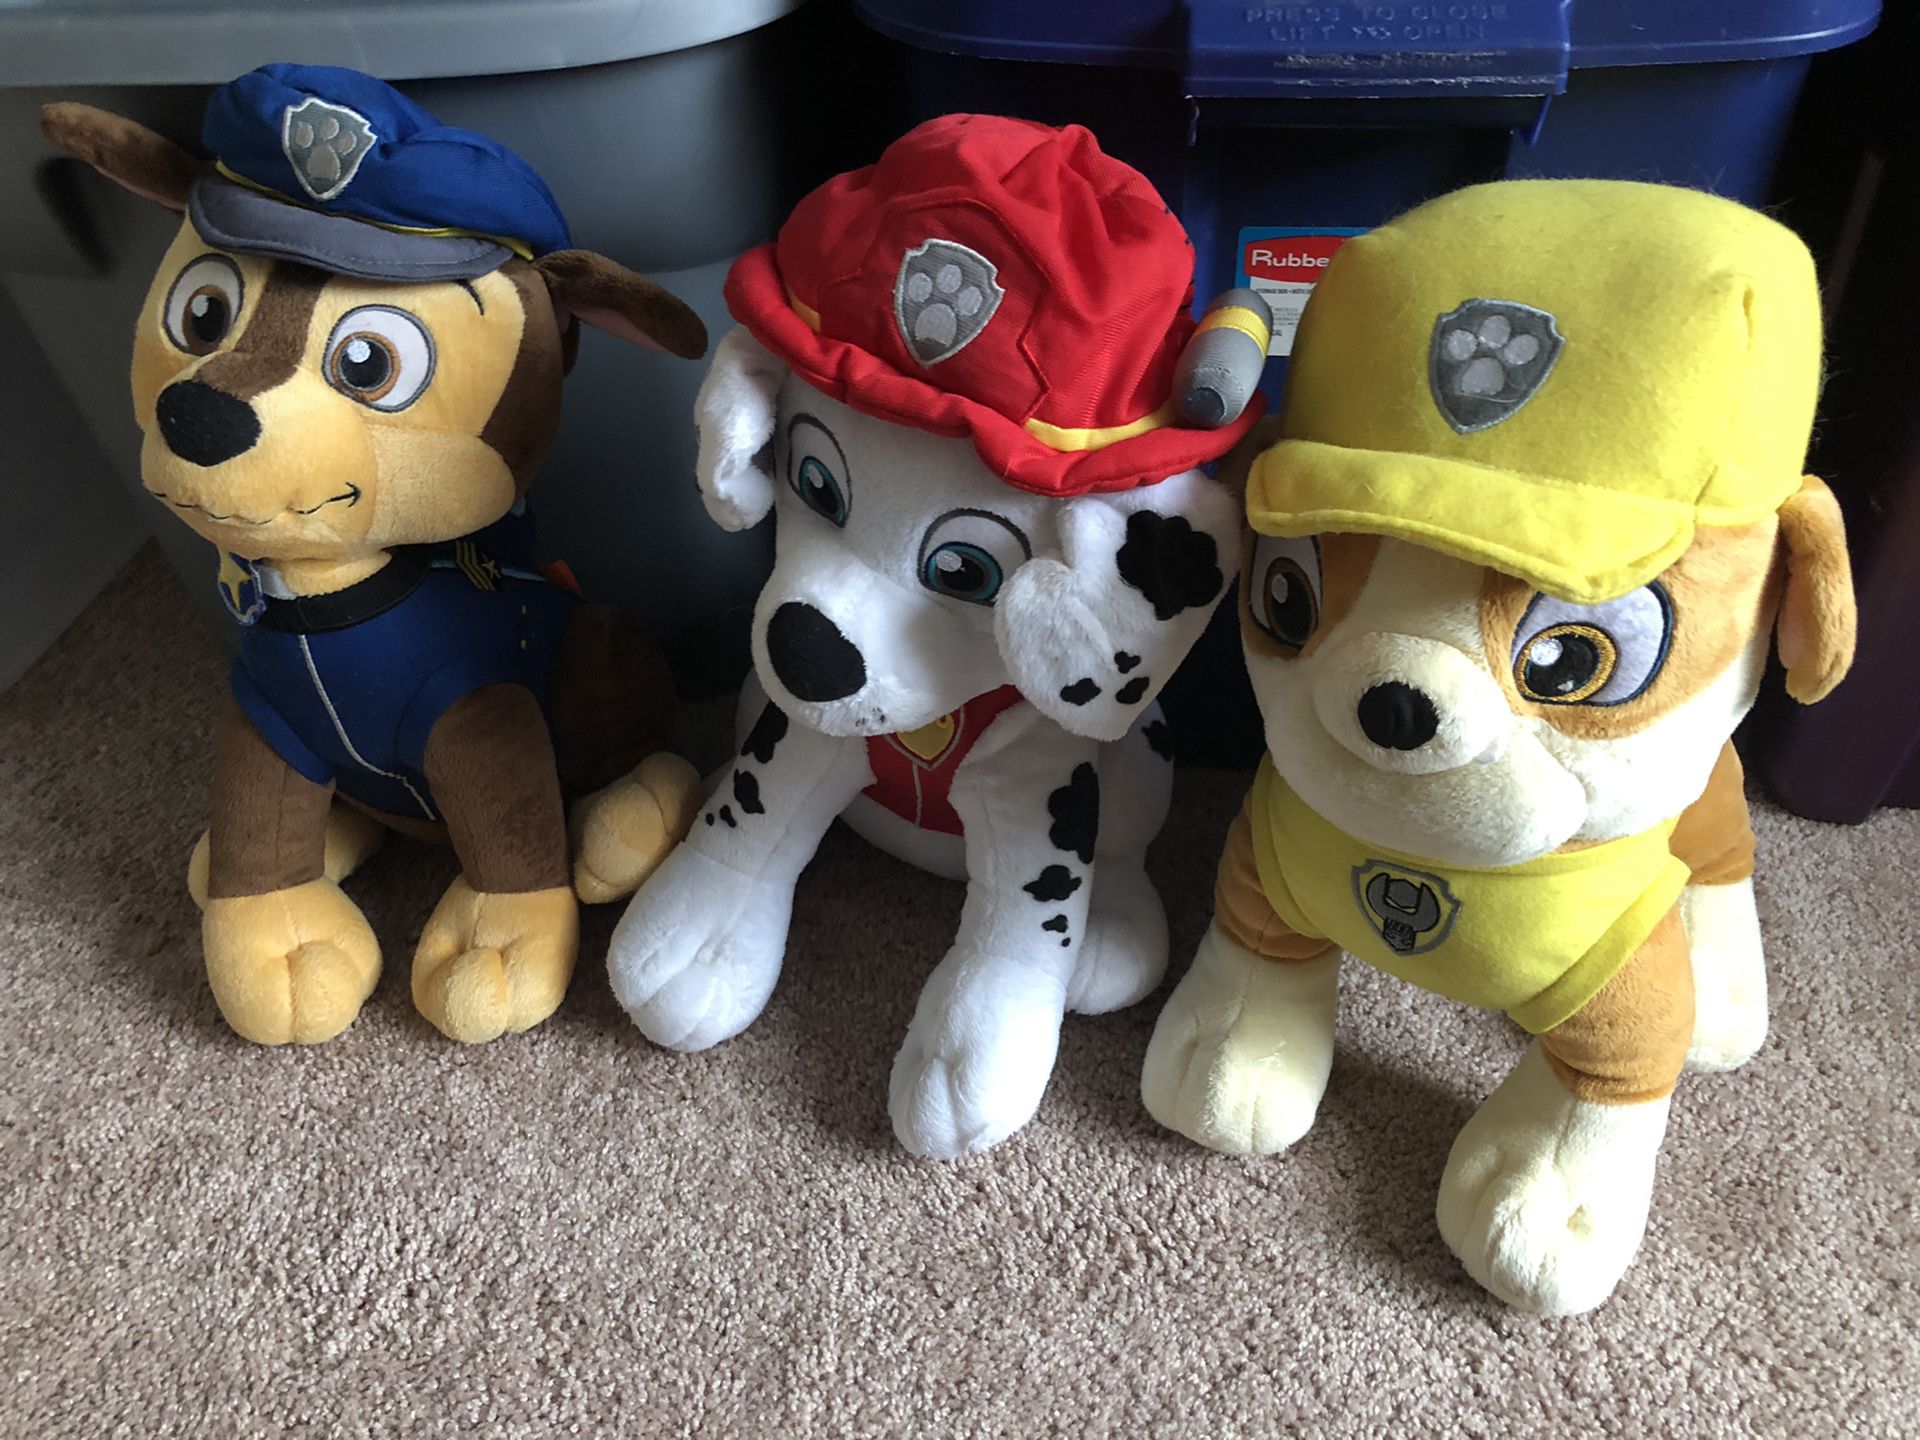 Paw patrol stuffed animals. 10 for all or 5 each